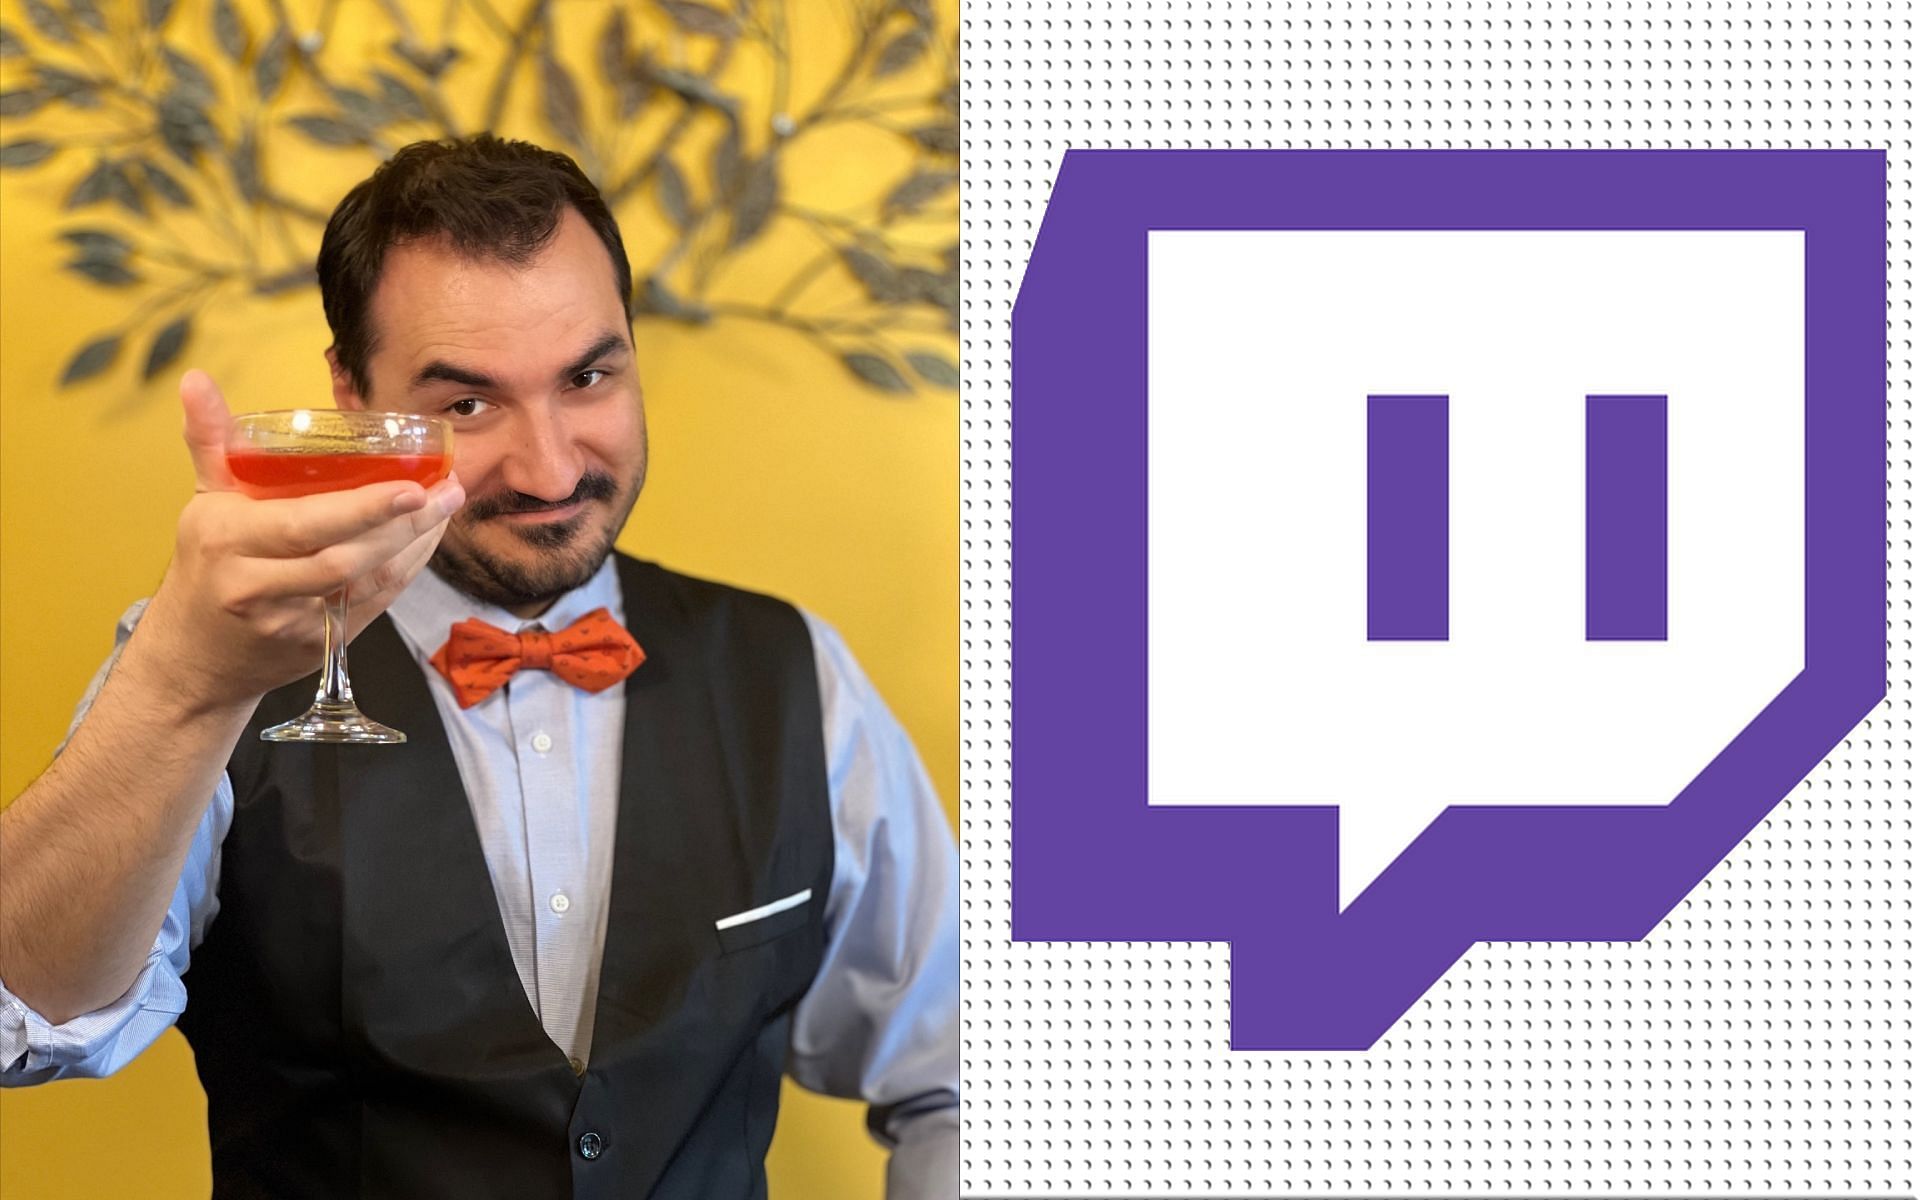 Kripparrian does not have any problems with gambling streams on Twitch (Image via Kripparrian/Twitter)